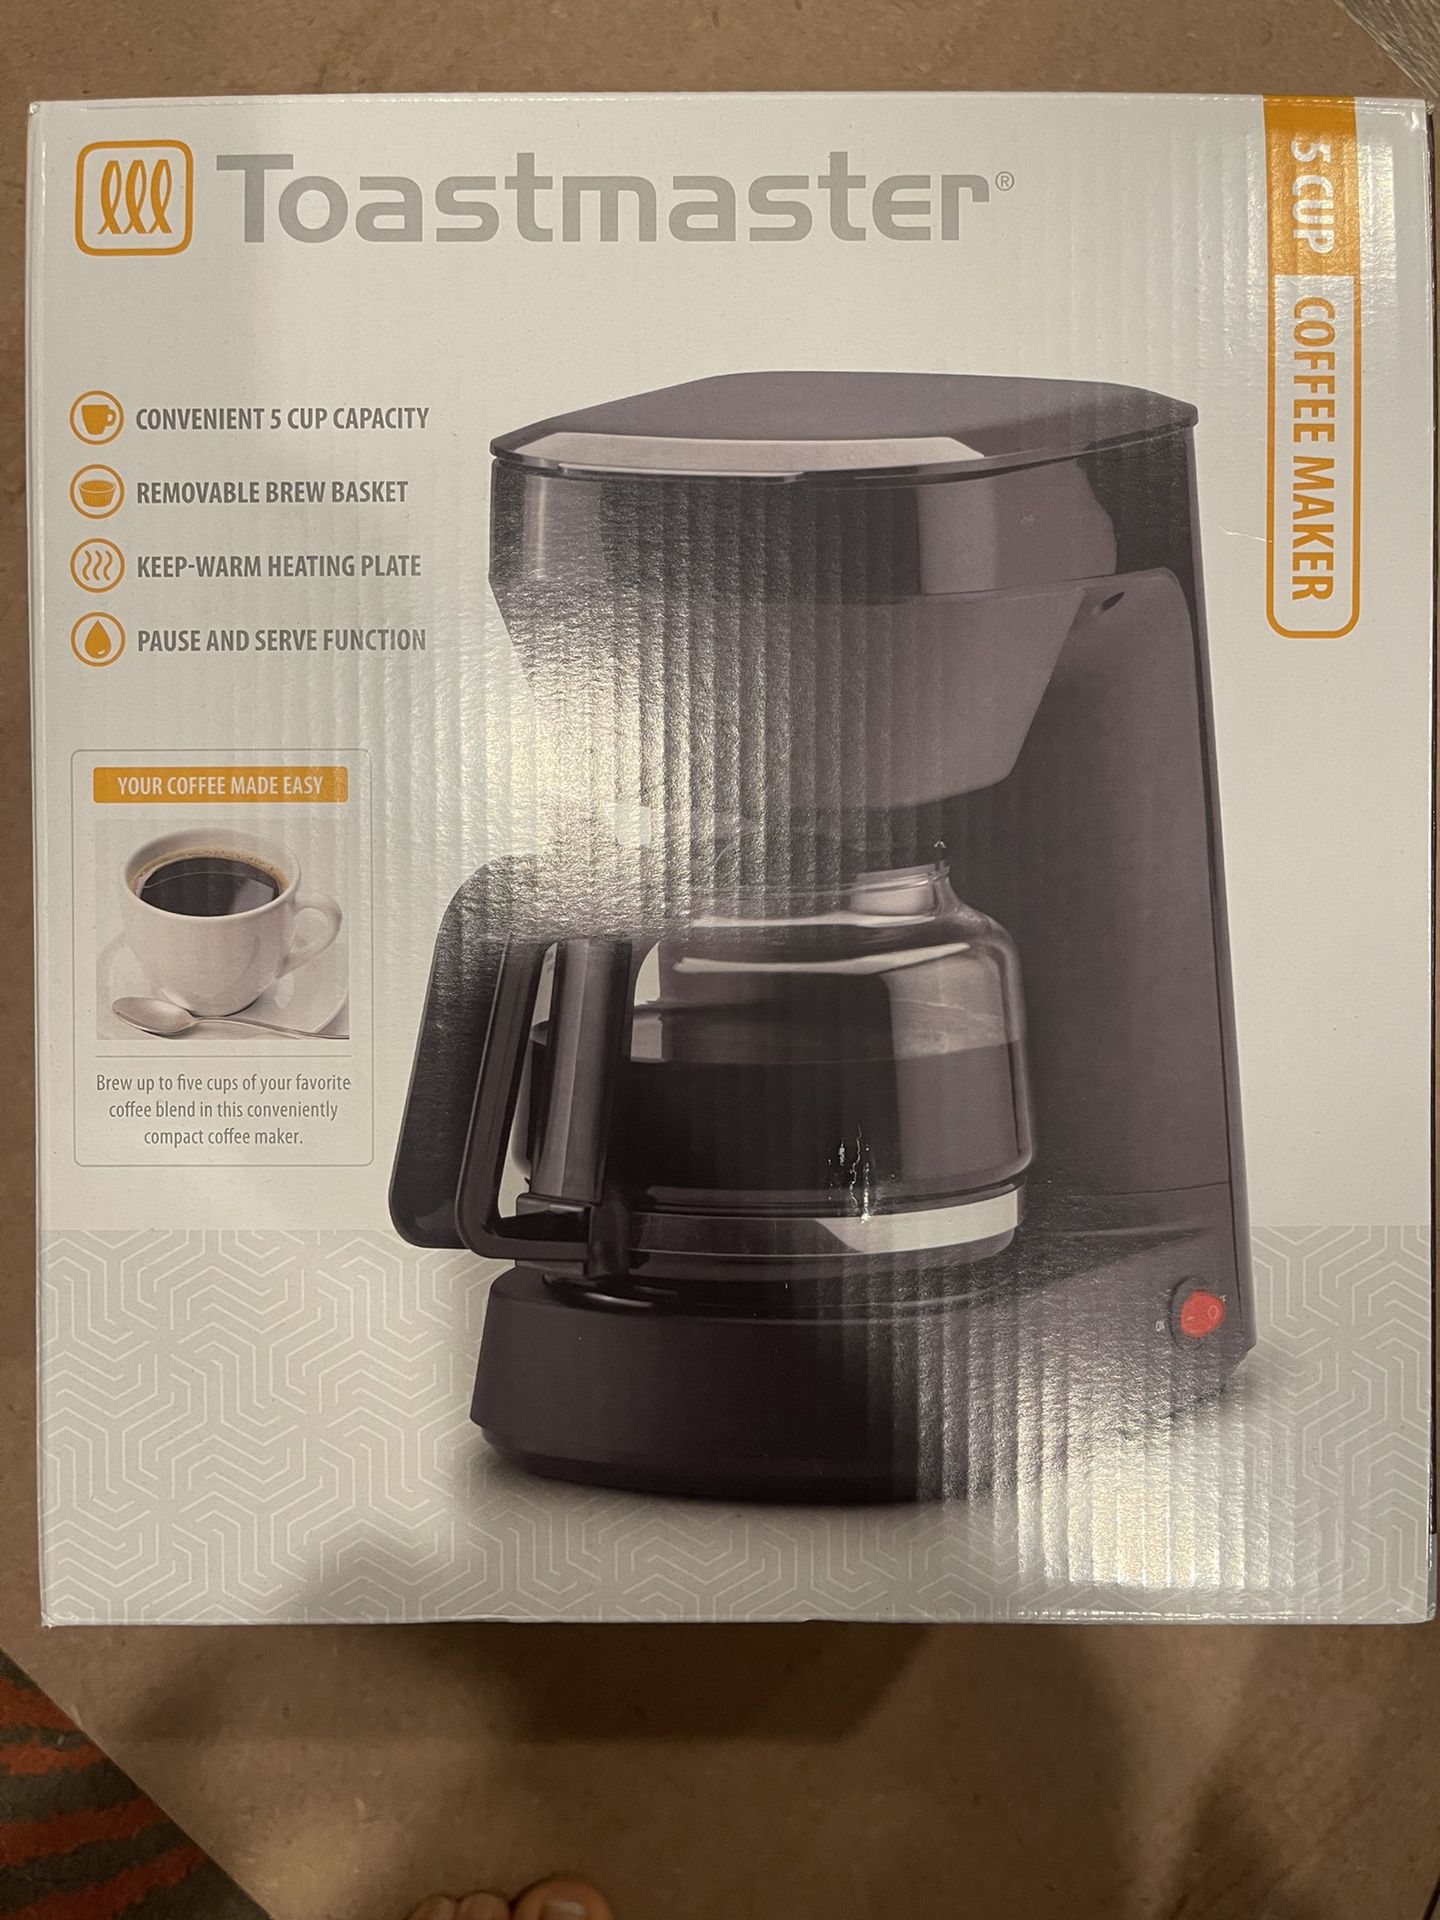 NEW Toastmaster 5 Cup Coffee Maker TM-545CMKL Black for Sale in